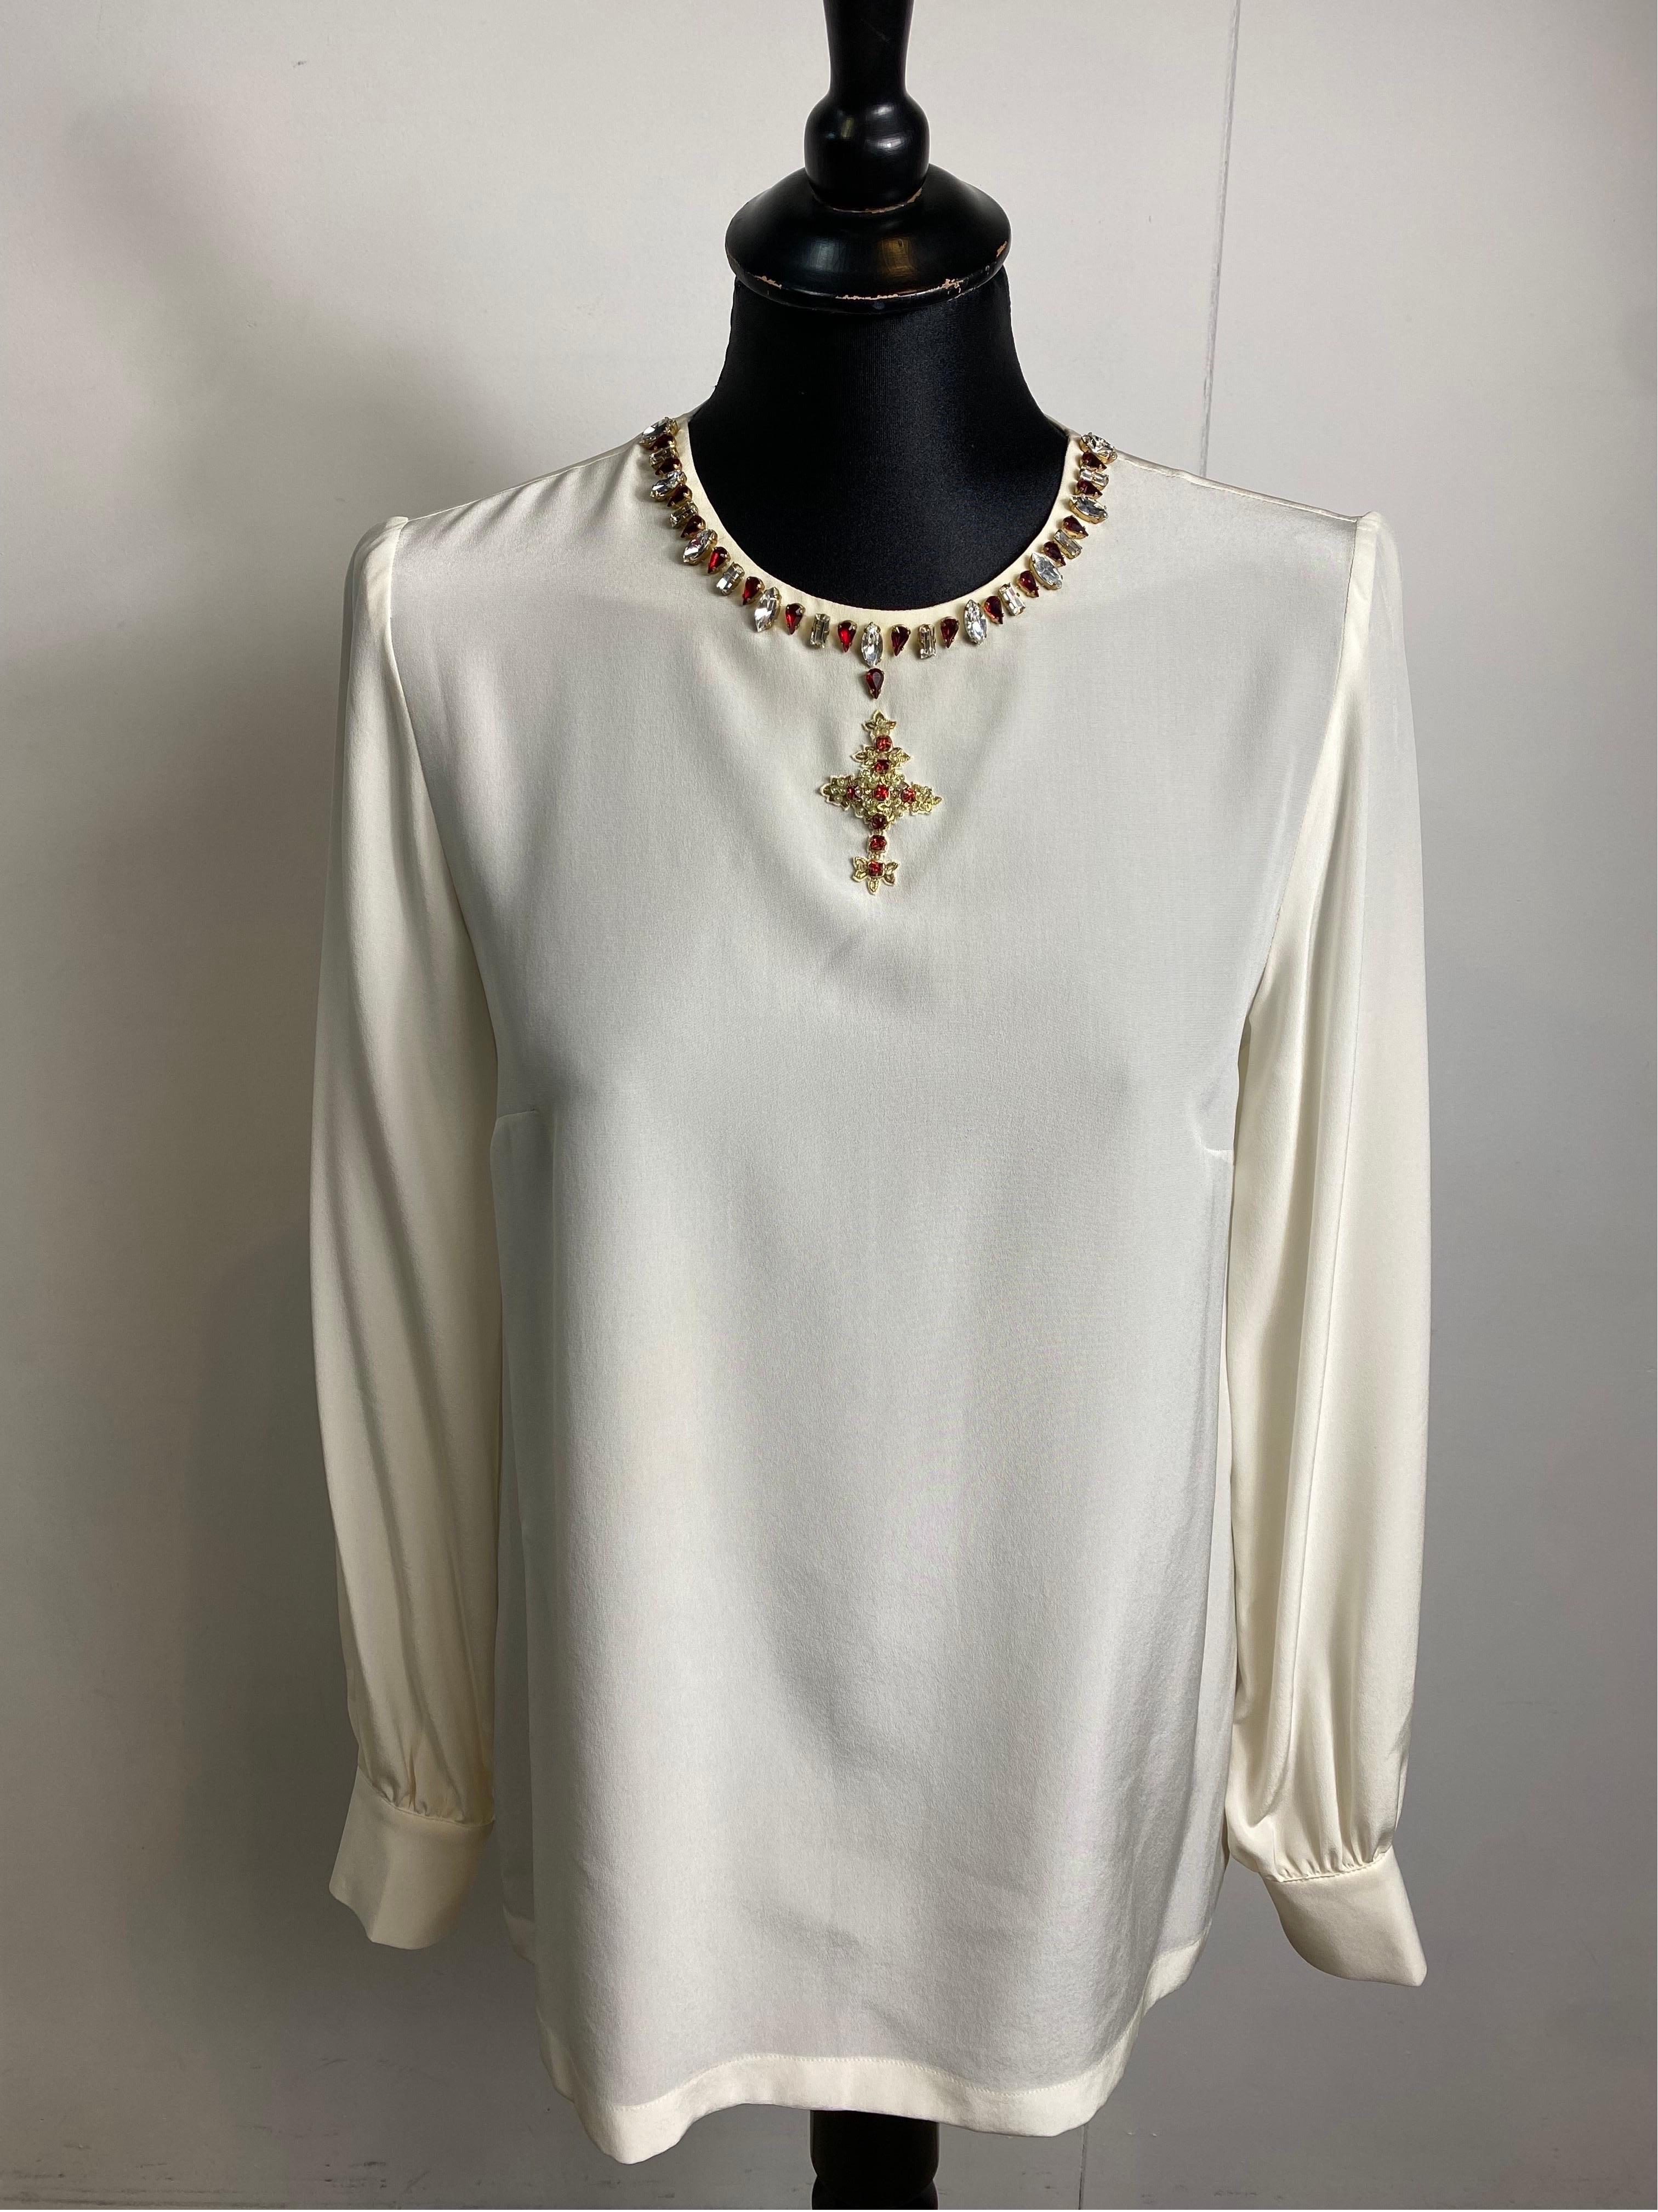 Dolce and Gabbana blouse.
Composition label missing but we think it is silk.
Very bright rhinestone details.
Italian size 40.
Shoulders 42 cm
Bust 44 cm
Length 64 cm
Sleeve 64 cm
Good general condition, with minimal signs of normal use.